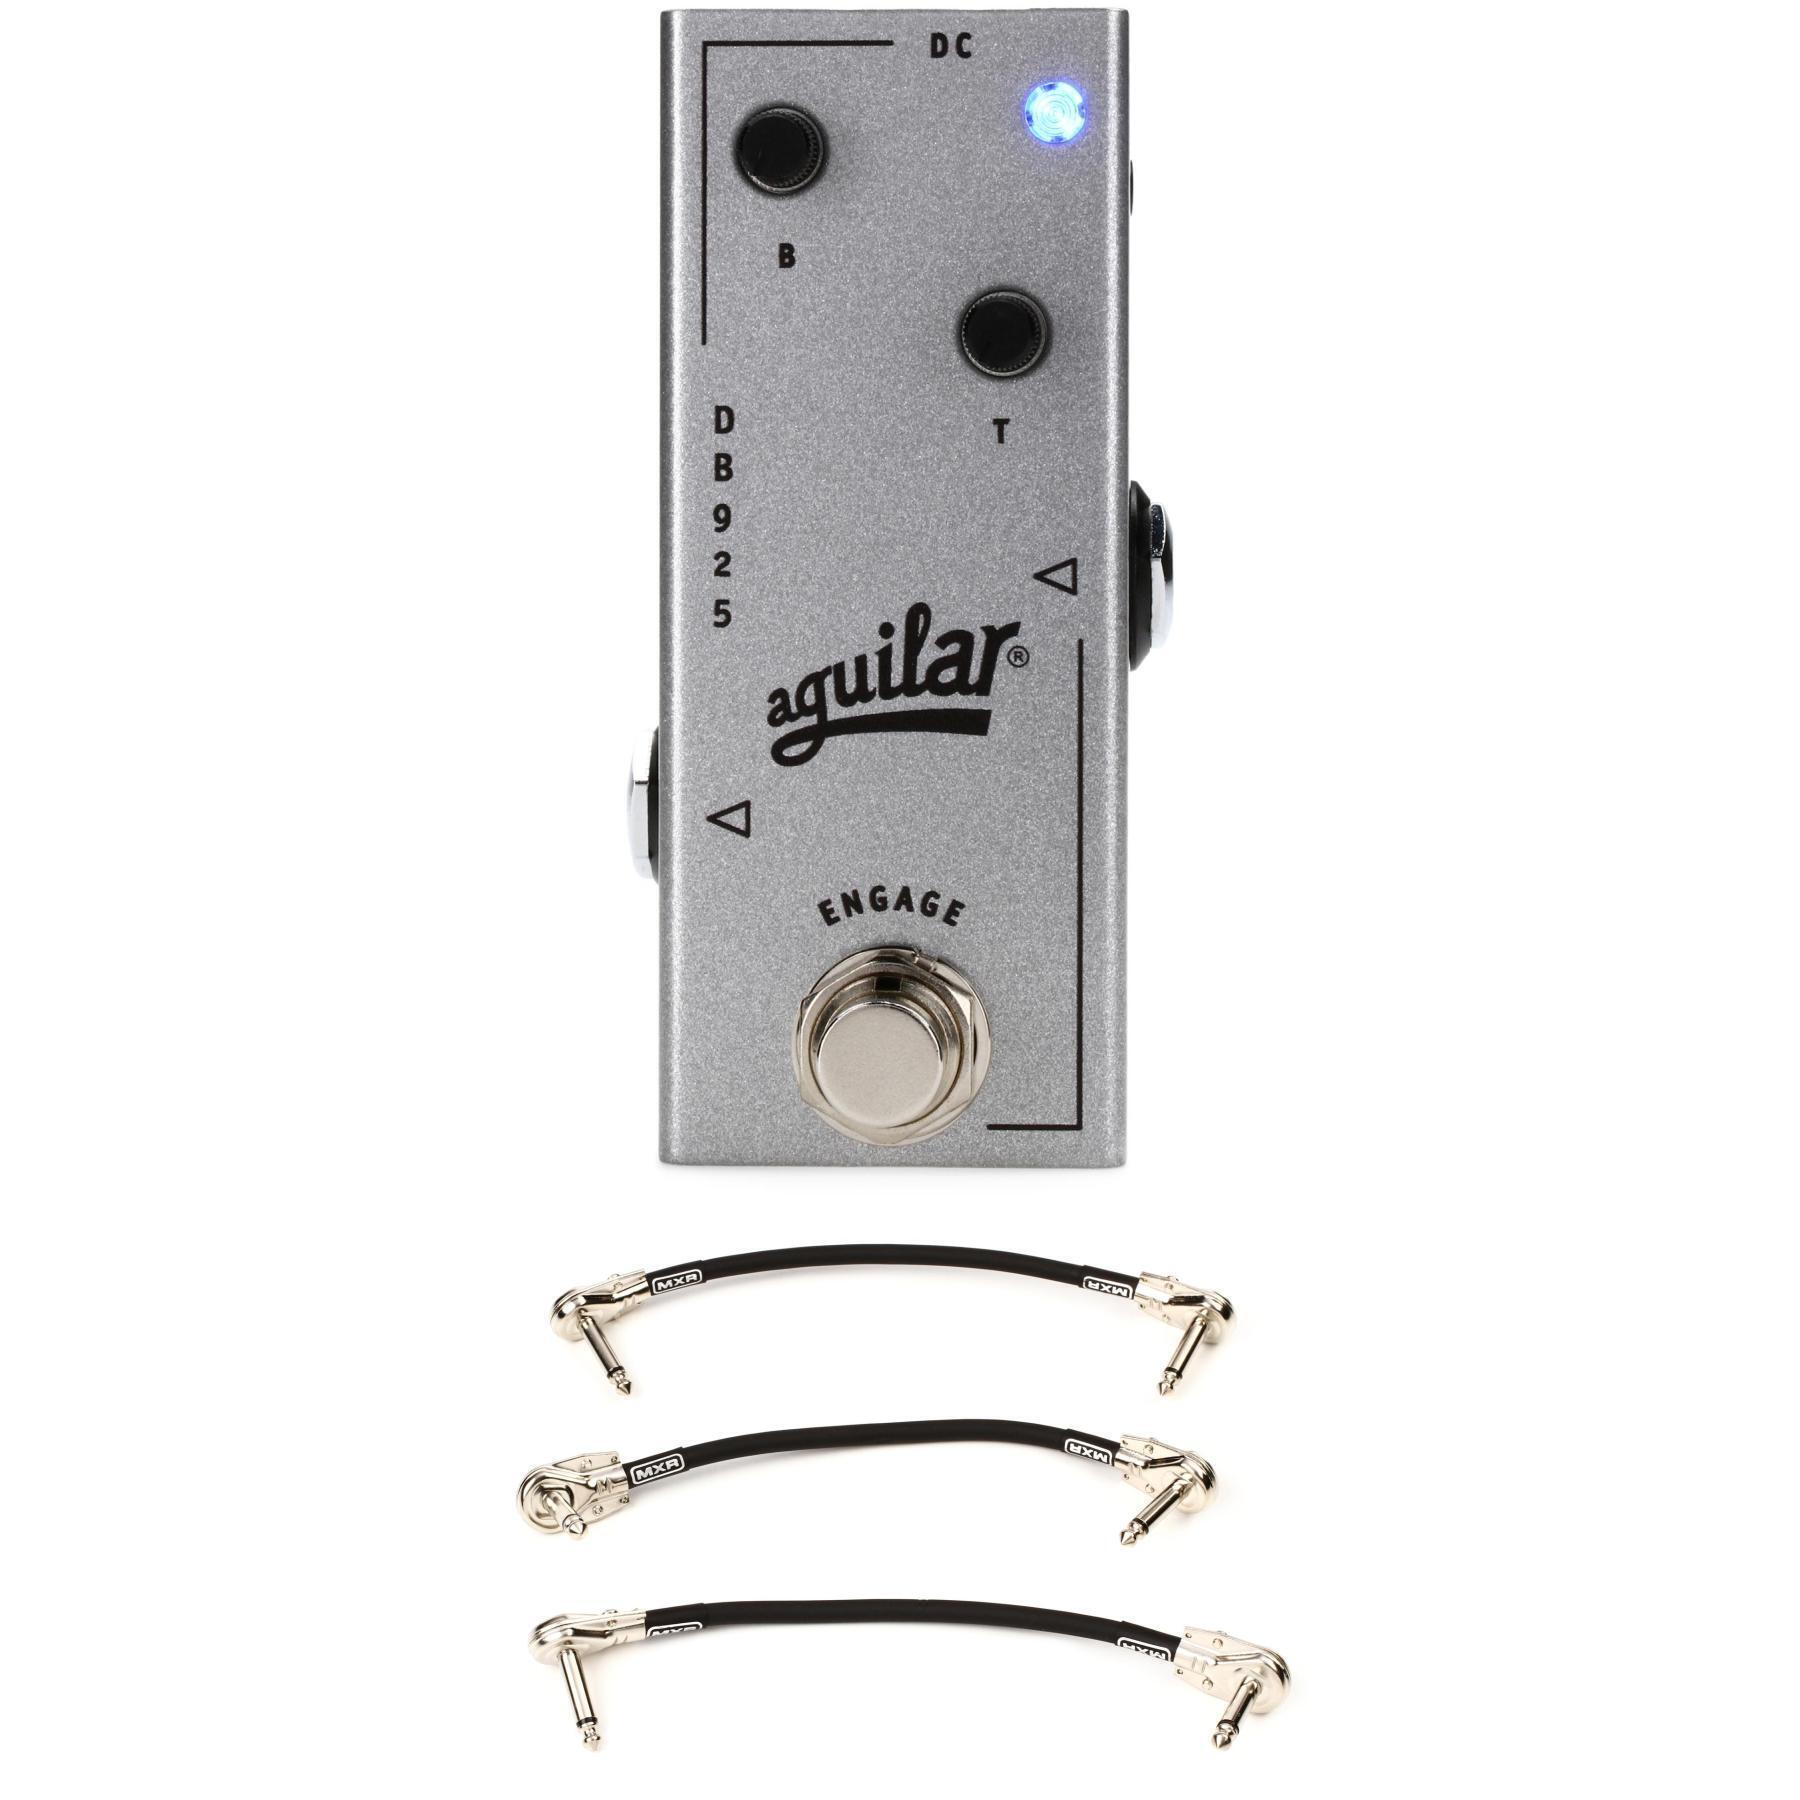 Aguilar DB 925 Preamp Pedal | Sweetwater